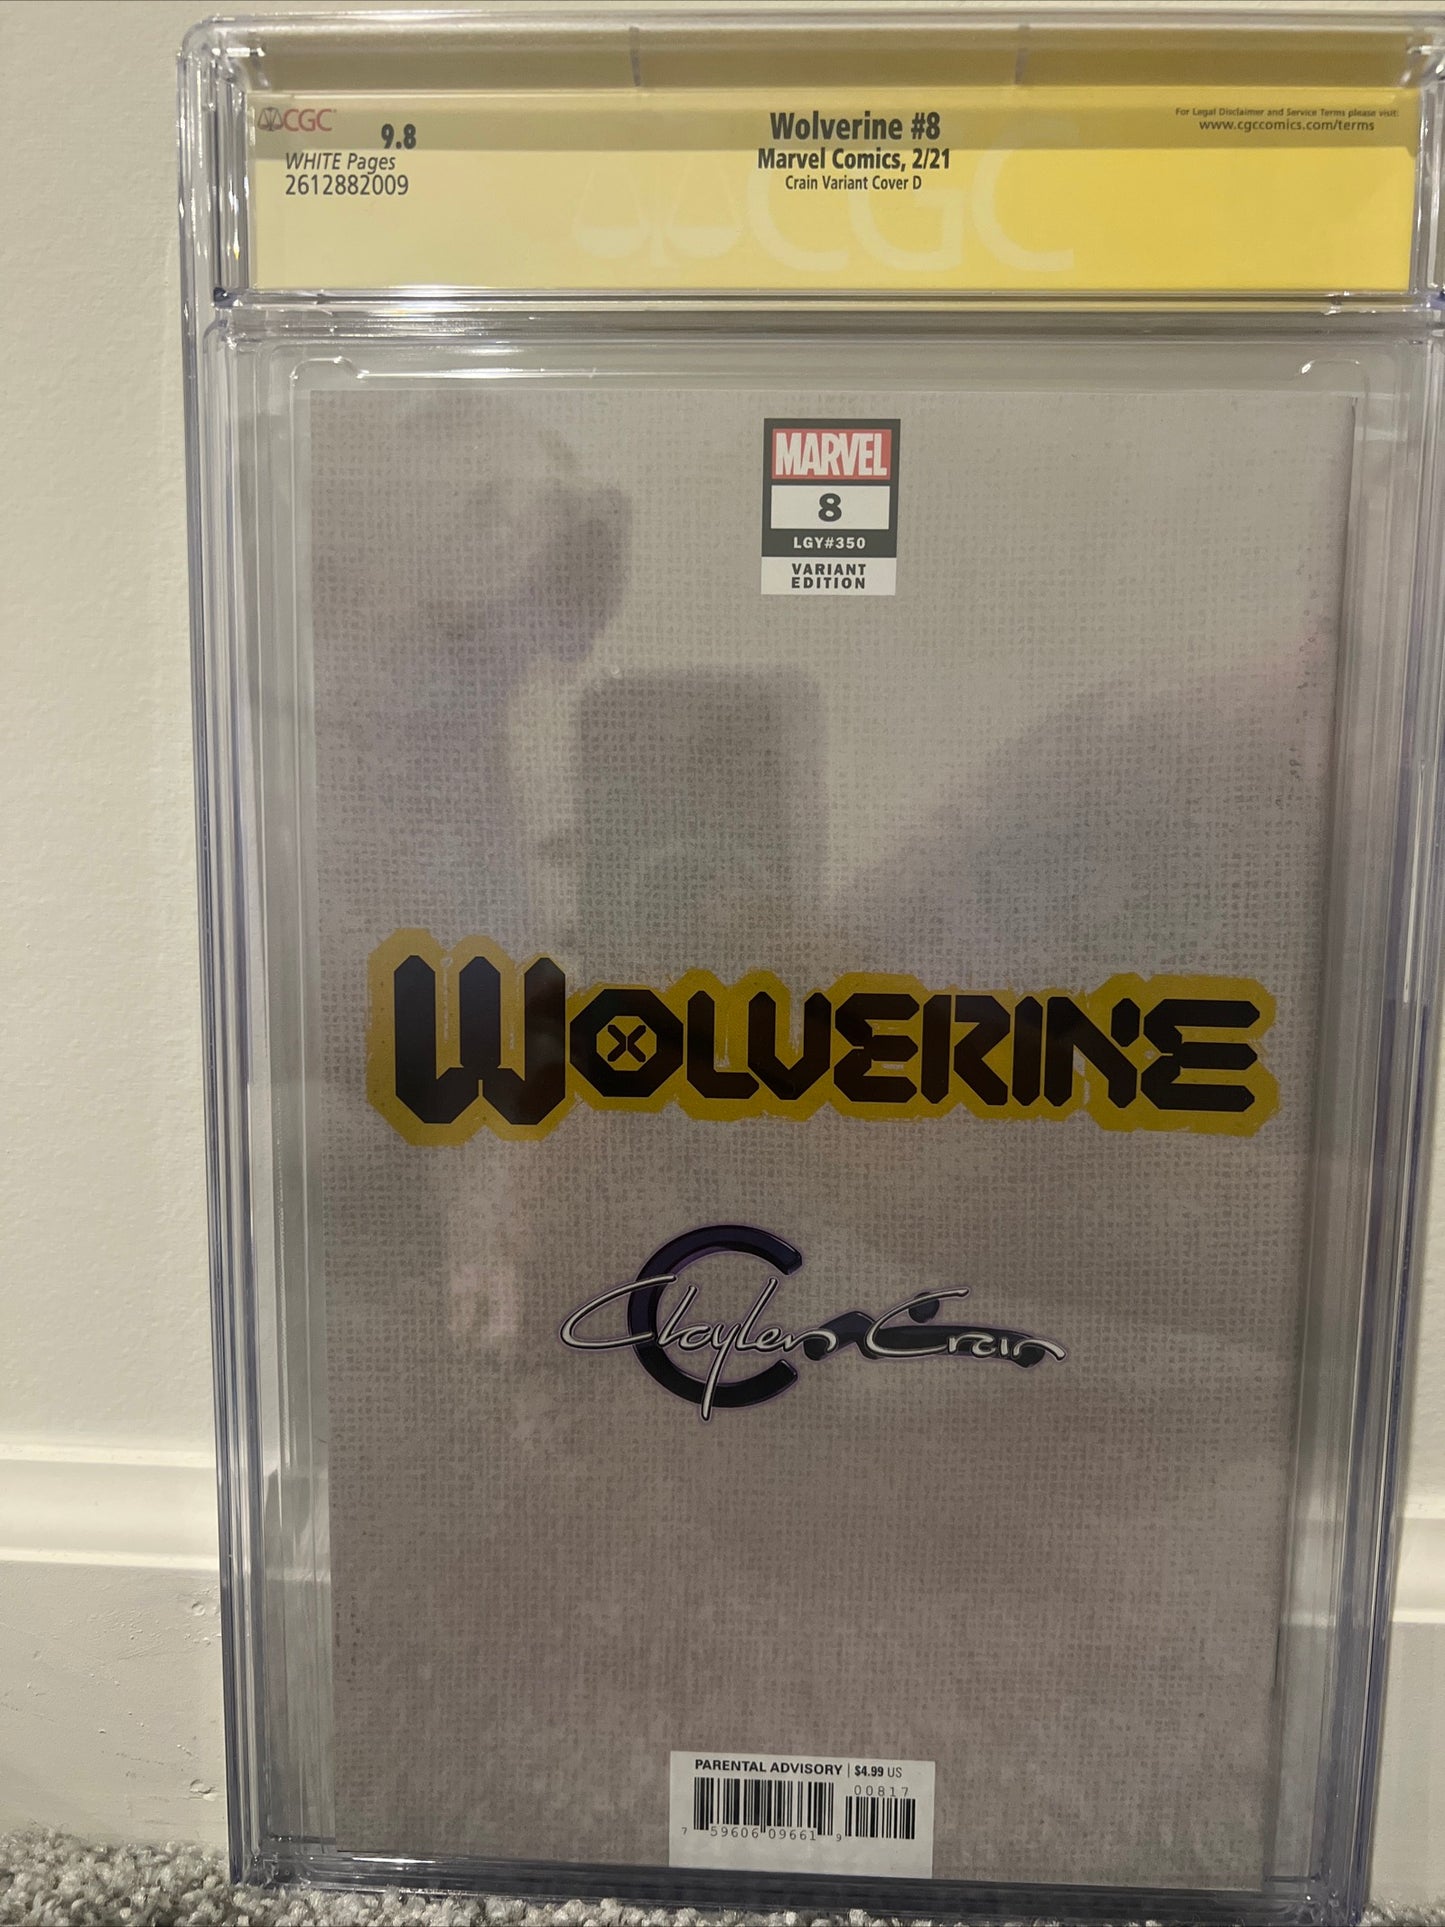 Wolverine #8 (6th Series) CGC SS 9.8 (Clayton Crain Virgin Cover D) Signed by Clayton Crain